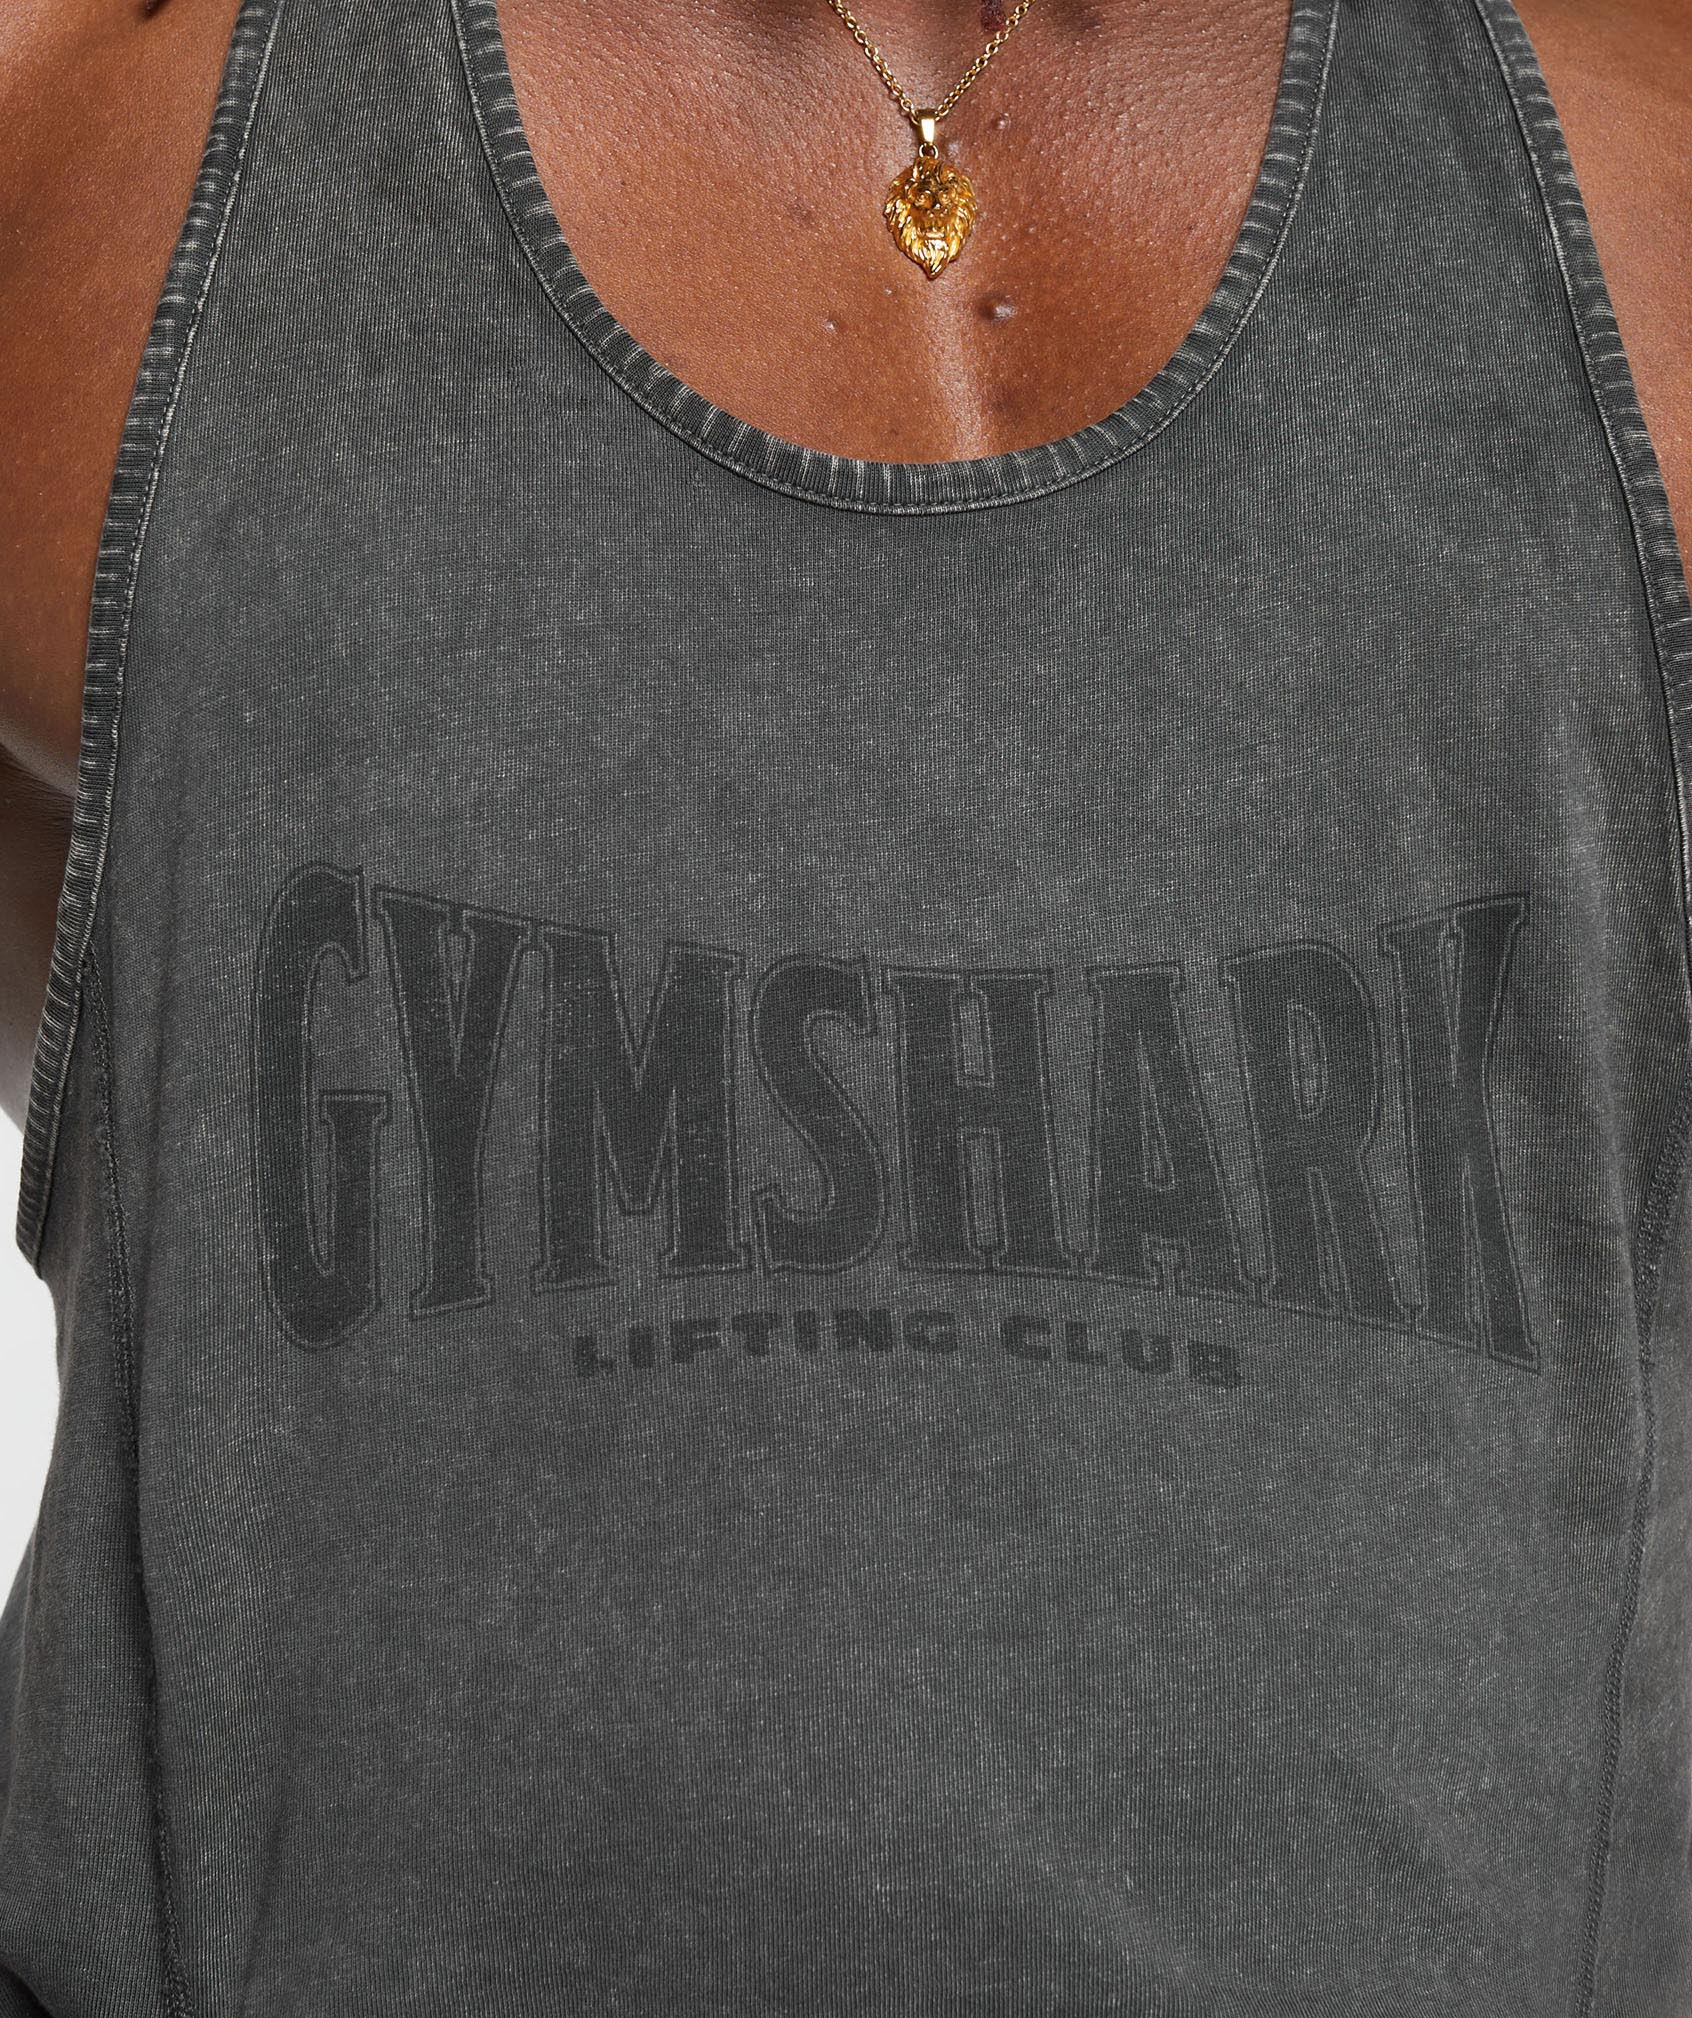 Heritage Washed Stringer in Onyx Grey - view 5